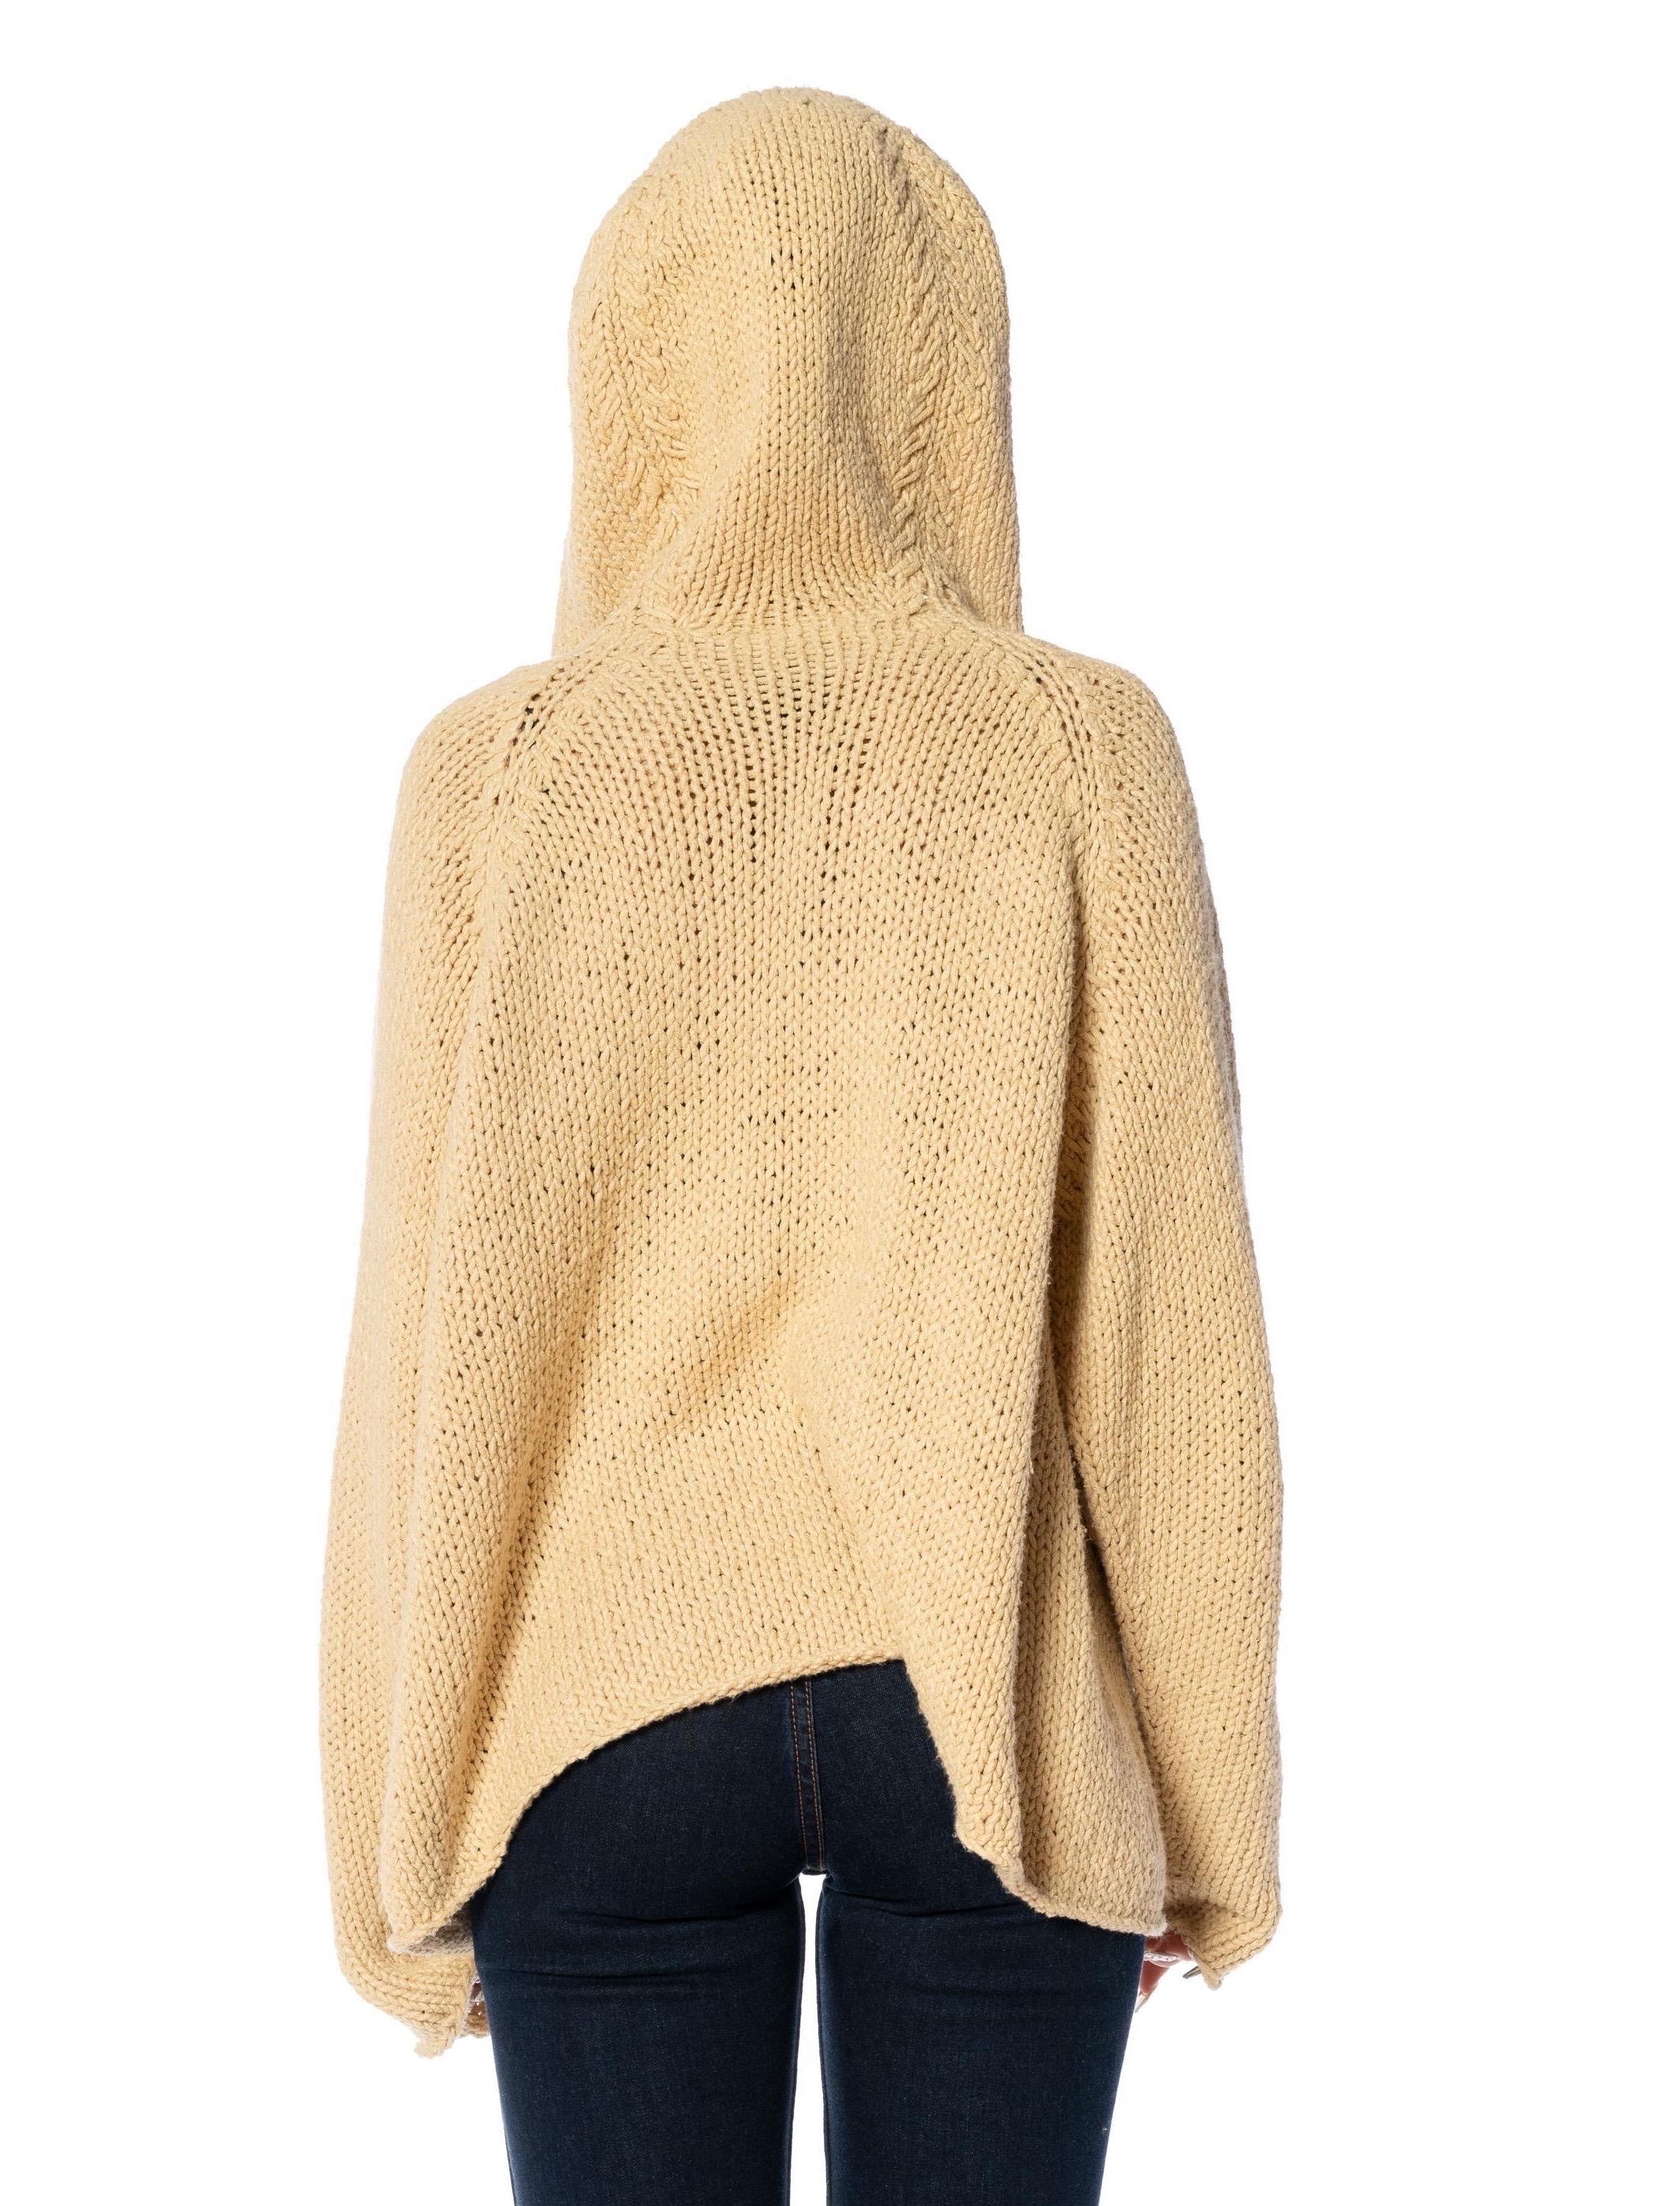 2000S DONNA KARAN Beige Cotton Knitted Cardigan With Hood For Sale 5